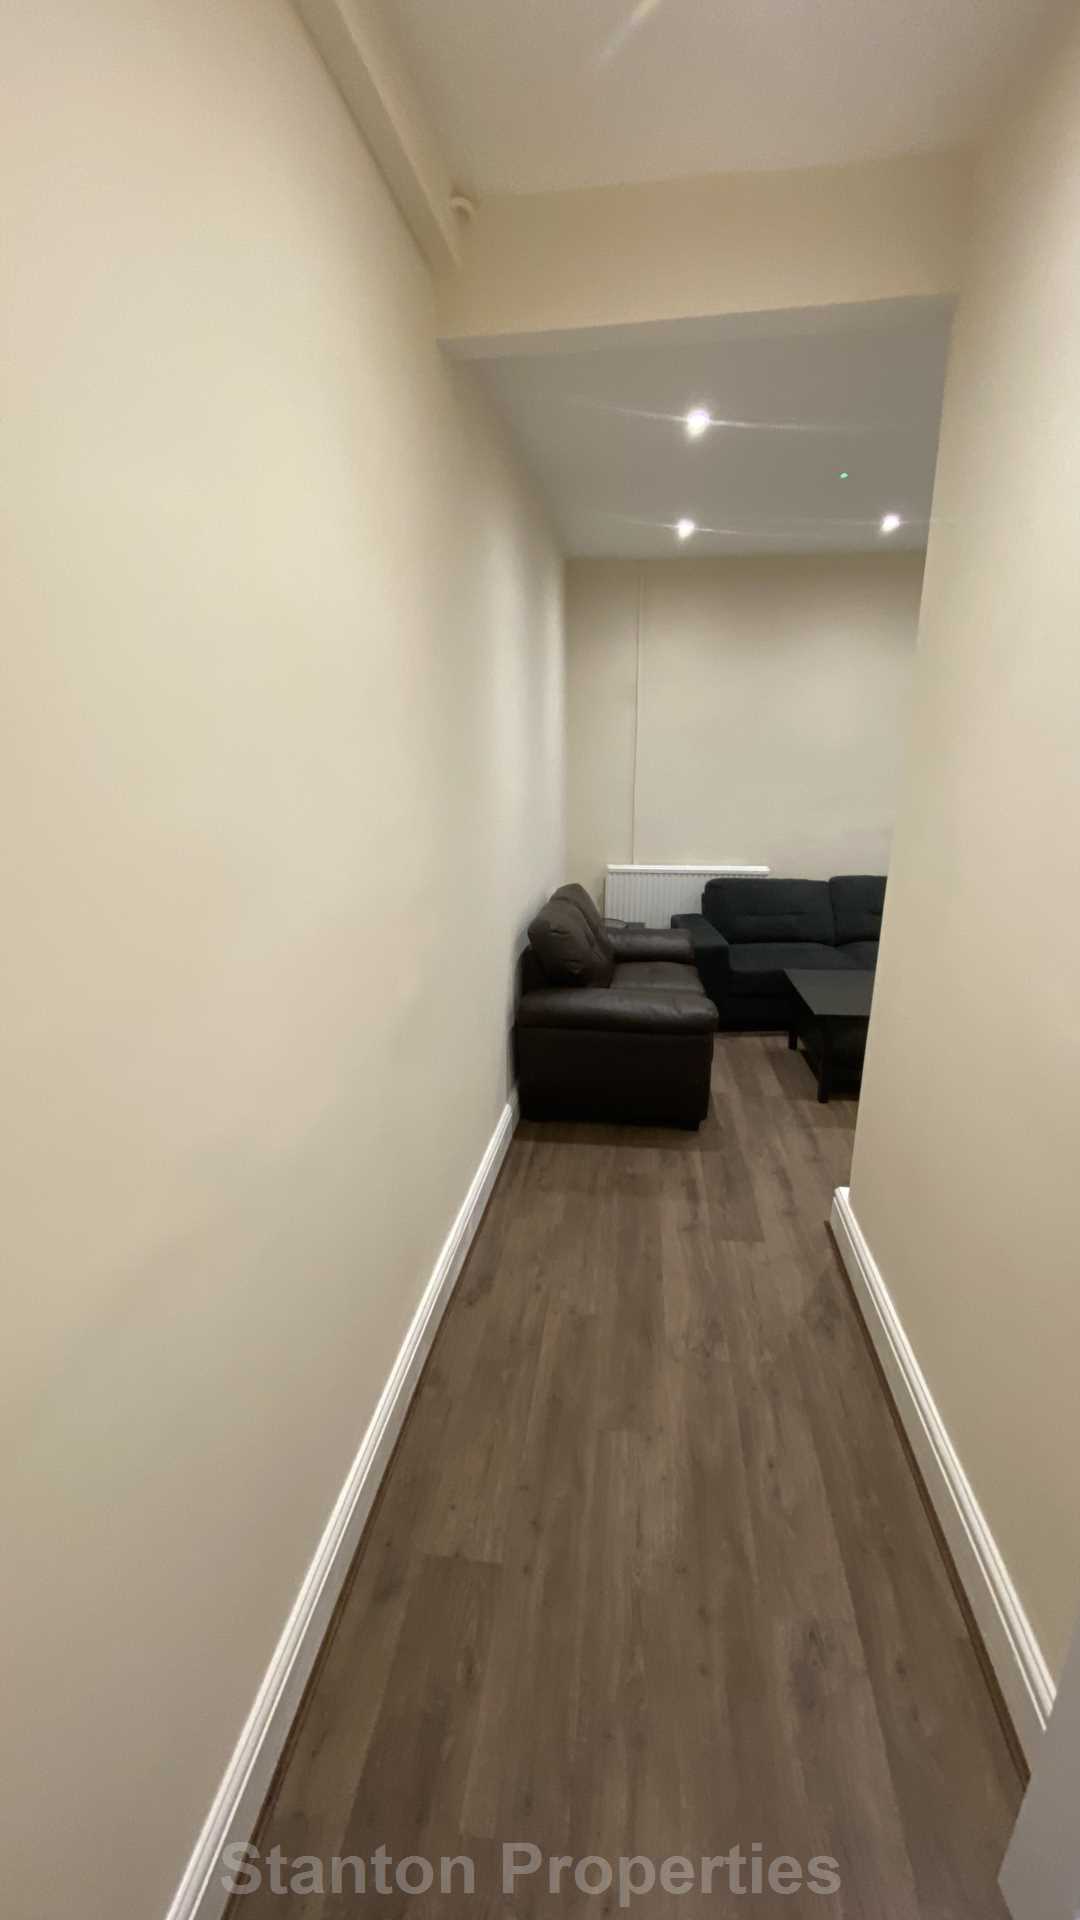 £130 pppw, Moseley Road, Fallowfield, M14 6NR, Image 7